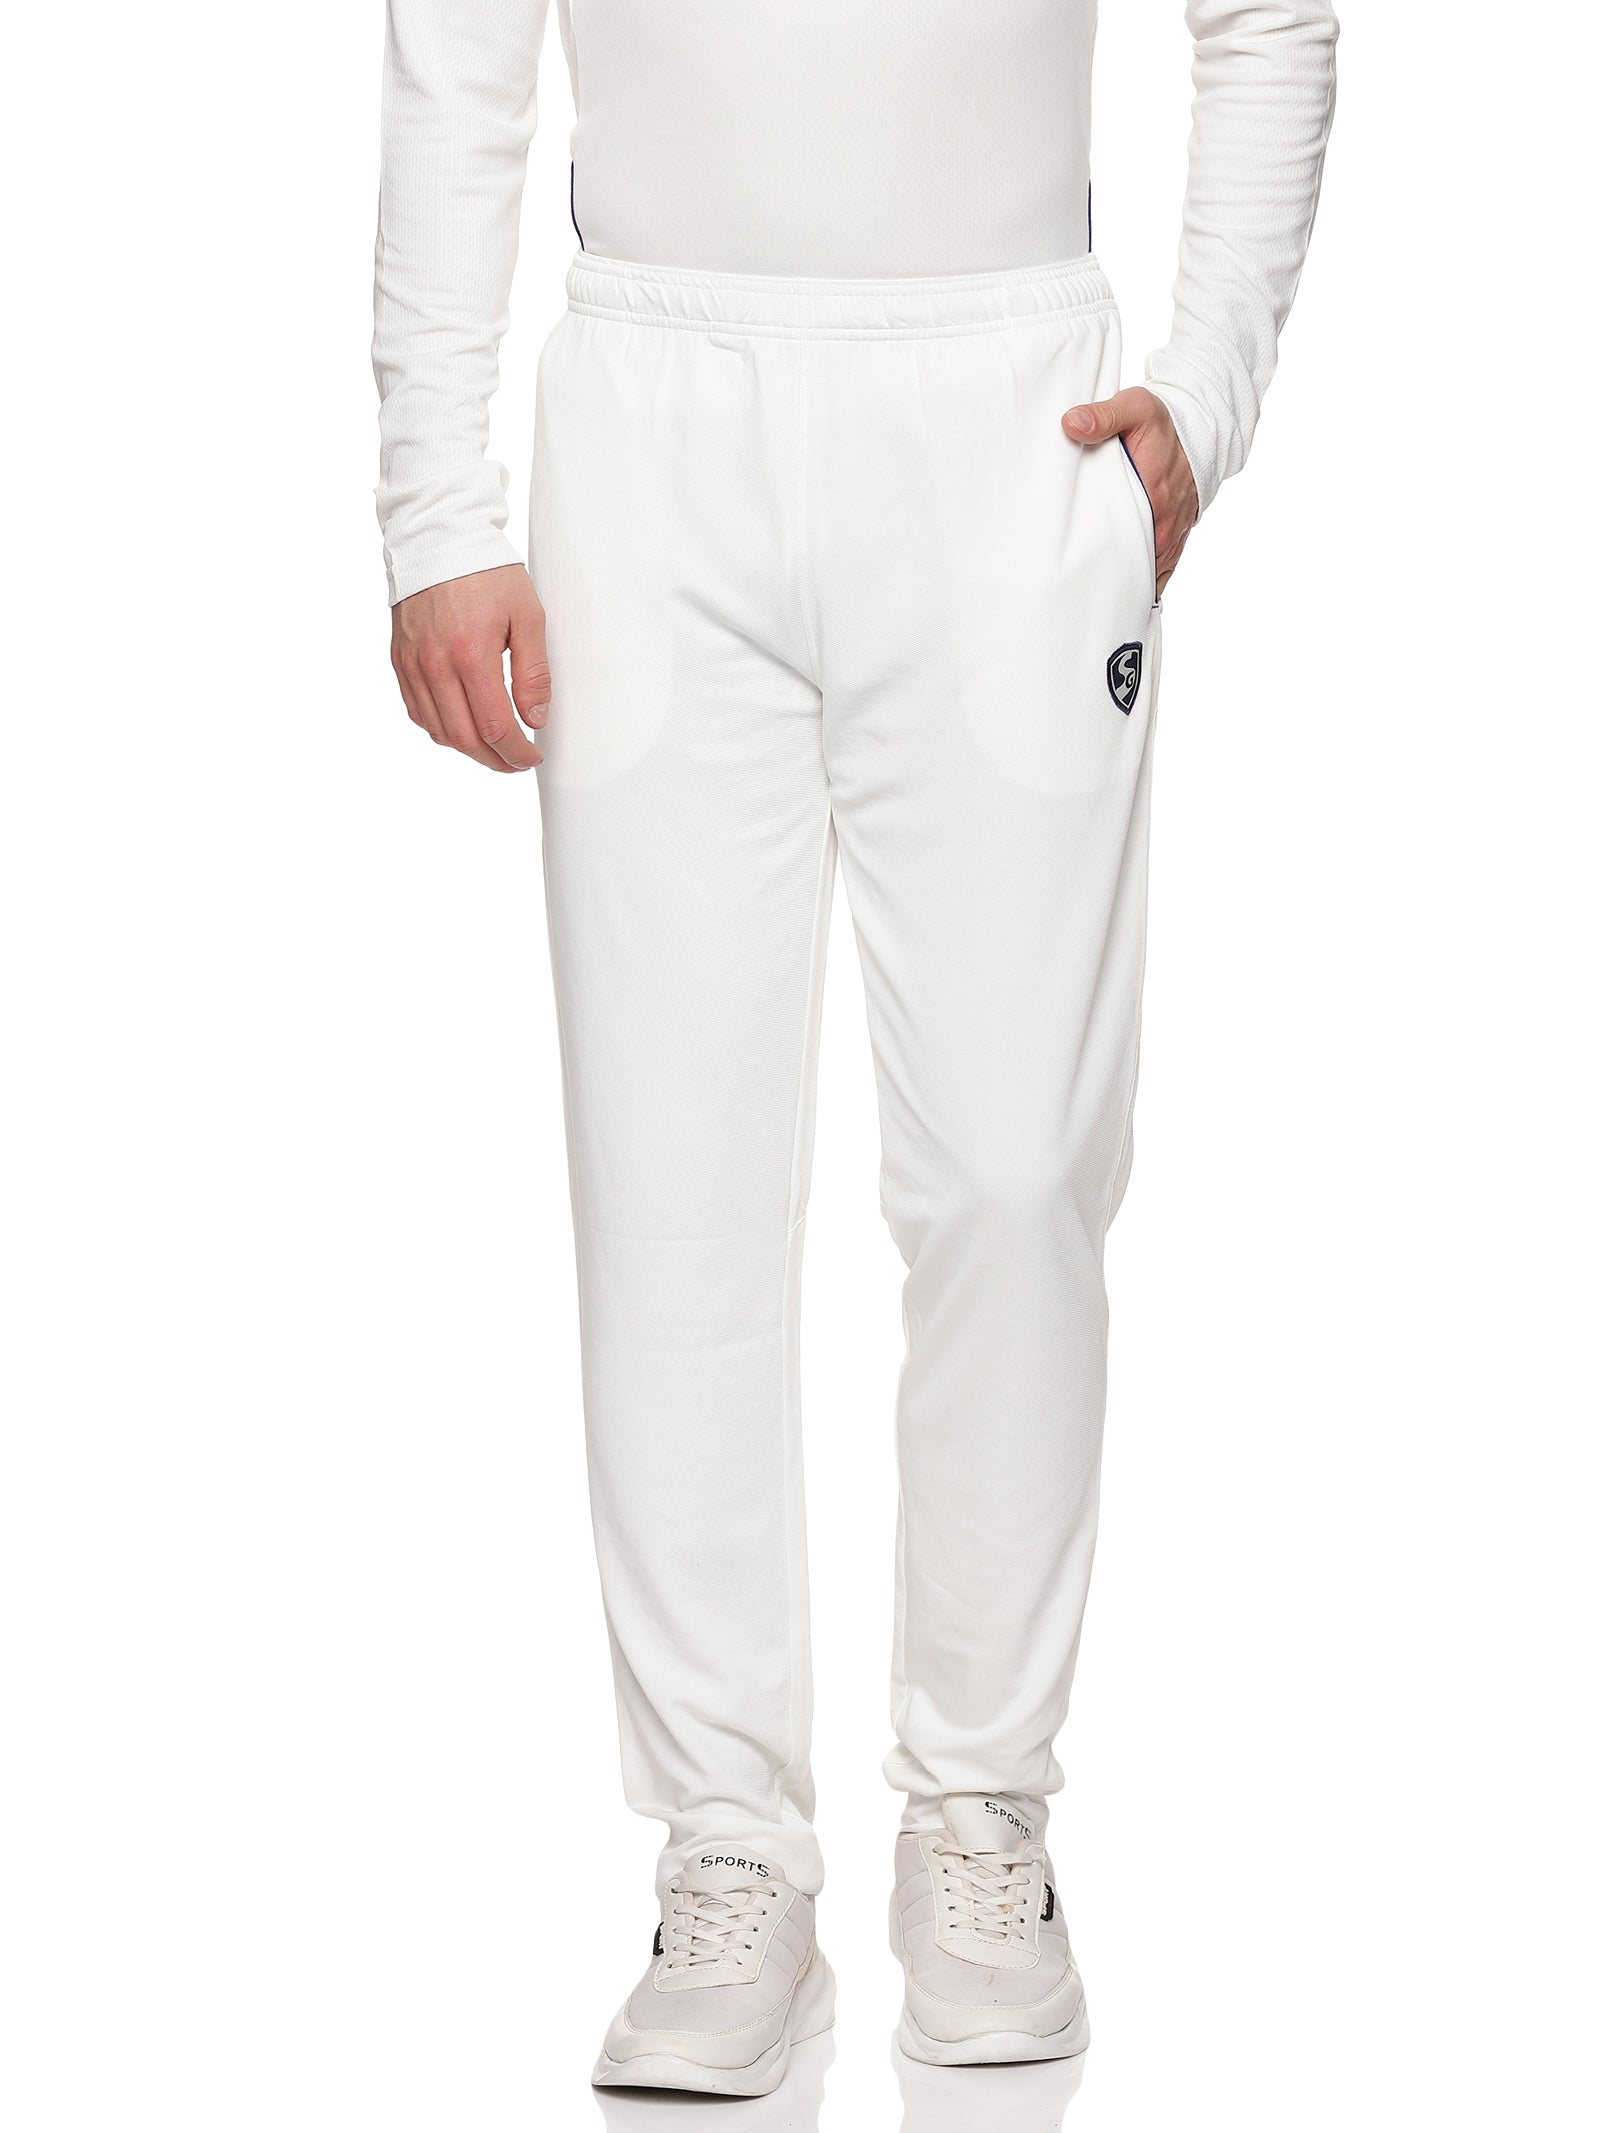 Prokick Cricket White Tshirt and Trouser Set  Full Sleeves Size  XL   Amazonin Clothing  Accessories